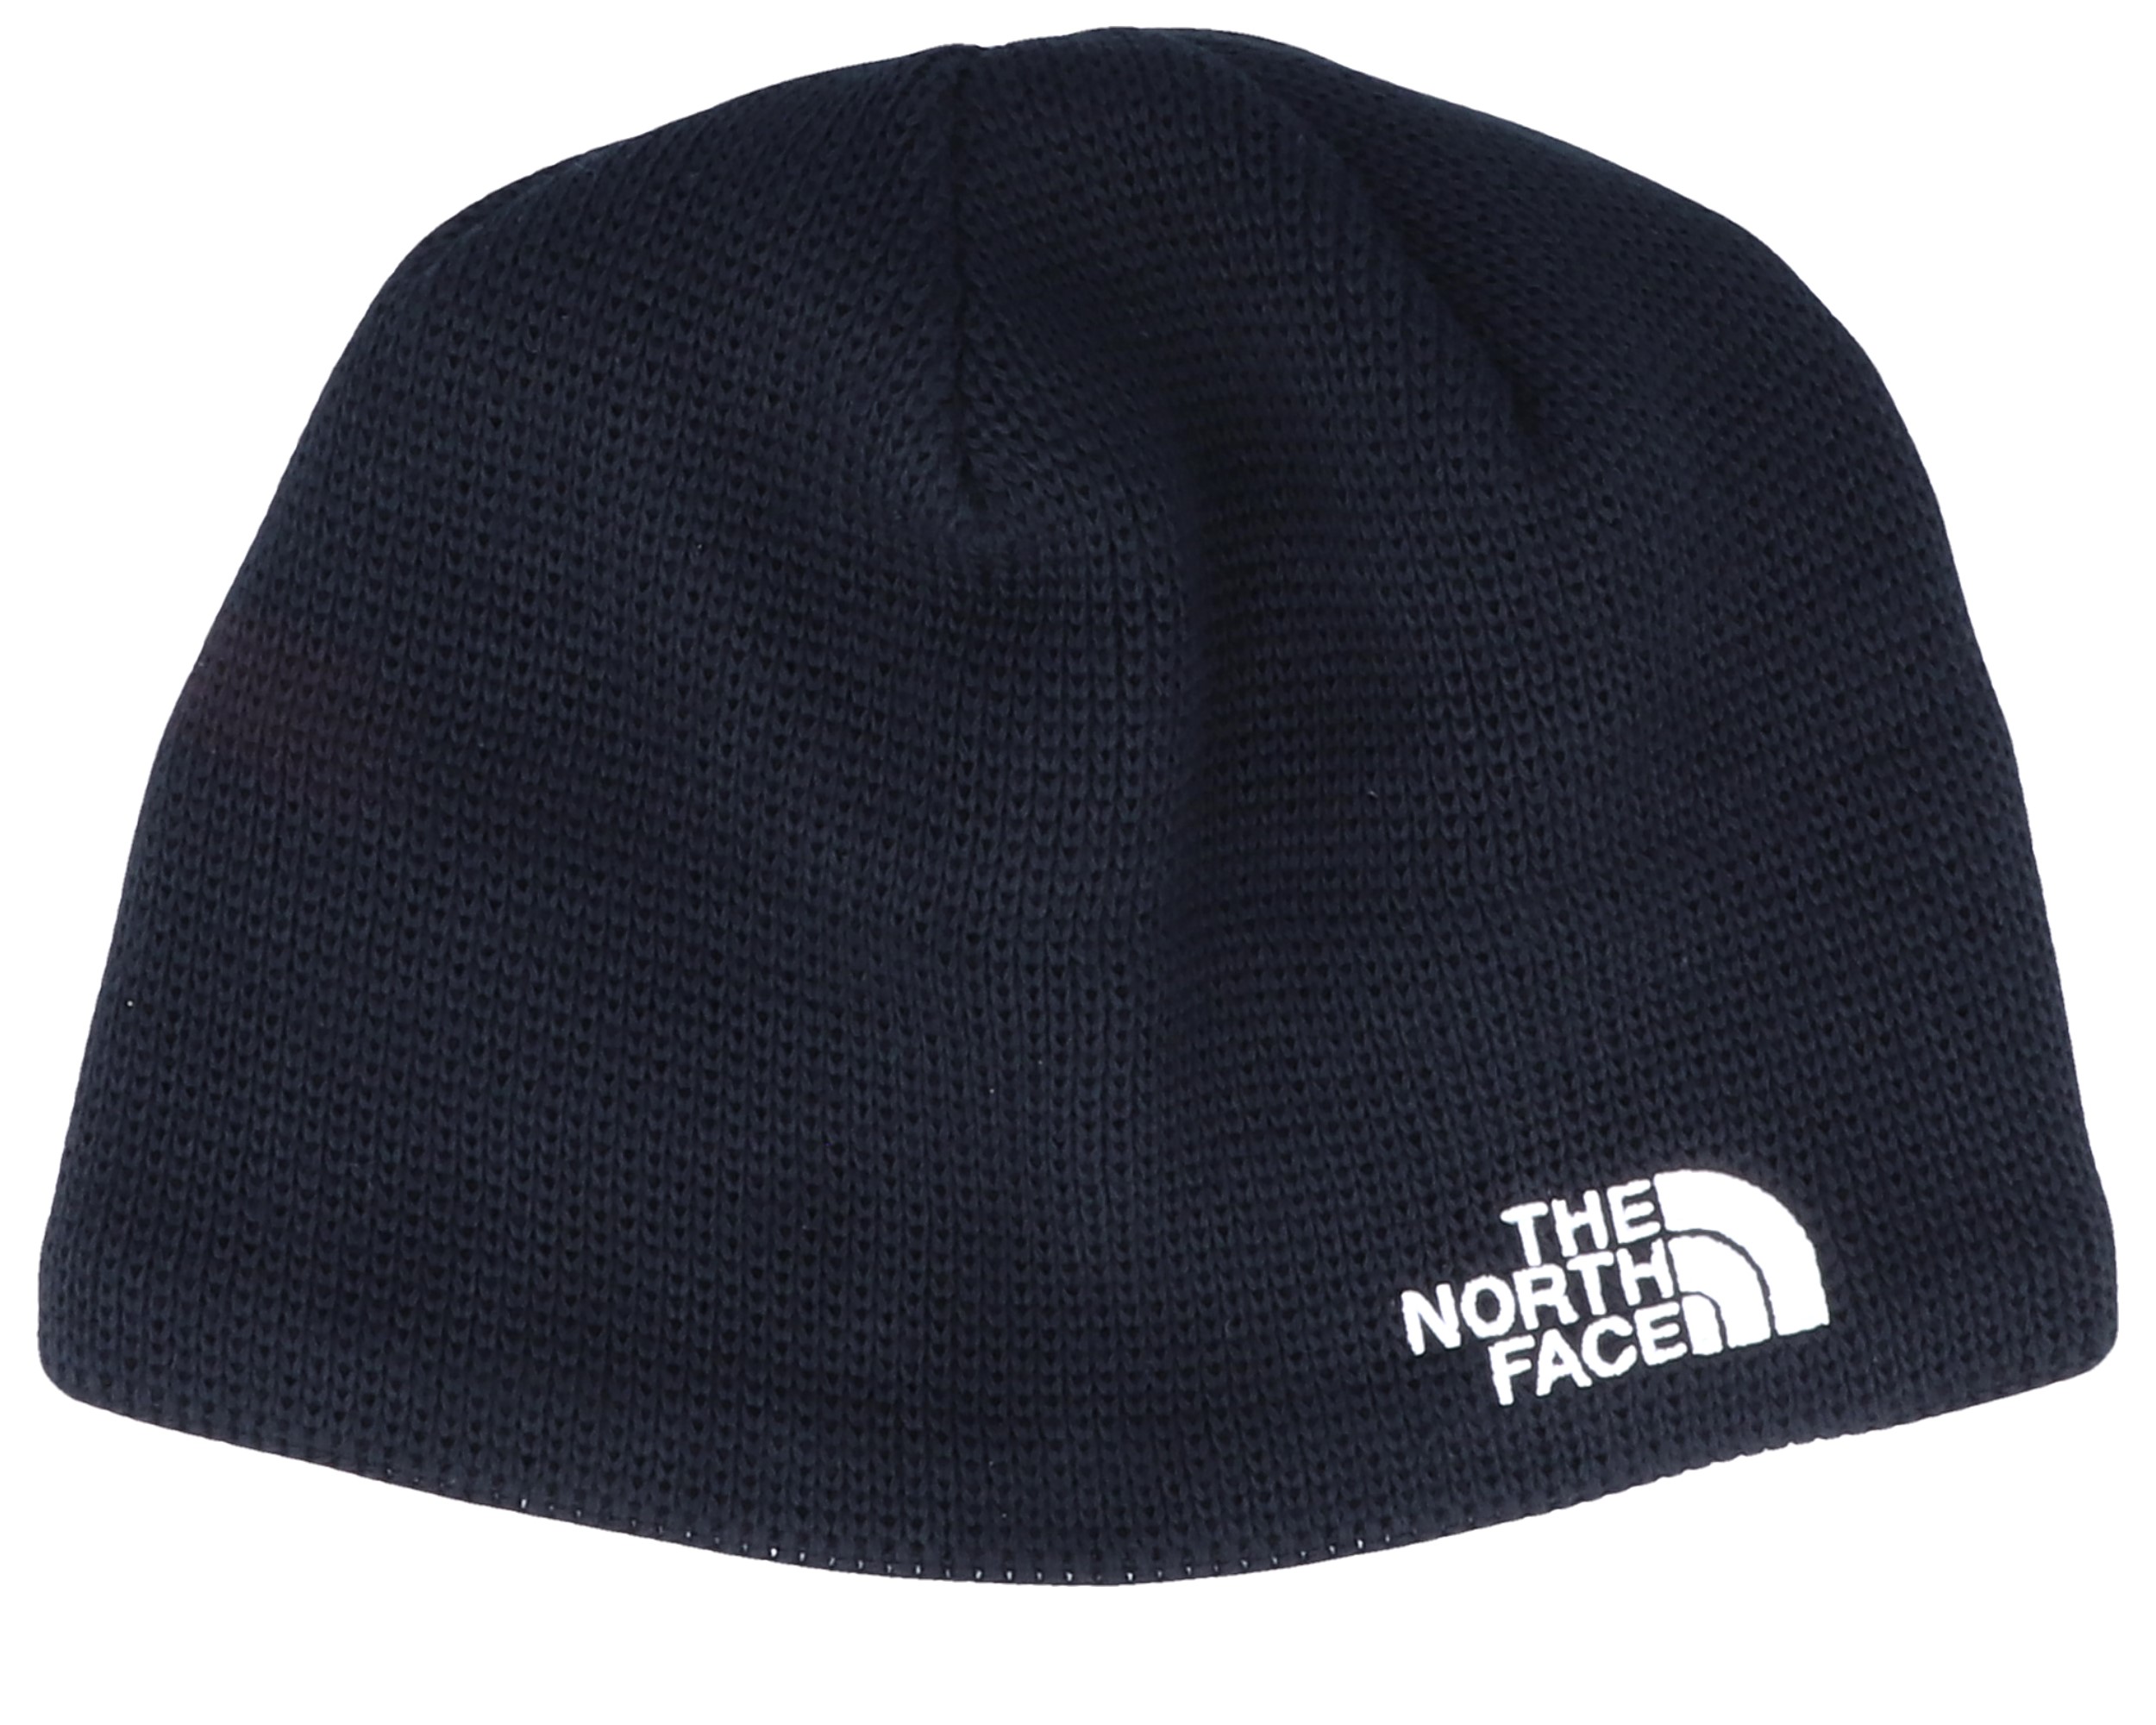 Kids Bones Recycled Black Traditional Beanie - The North Face beanies ...